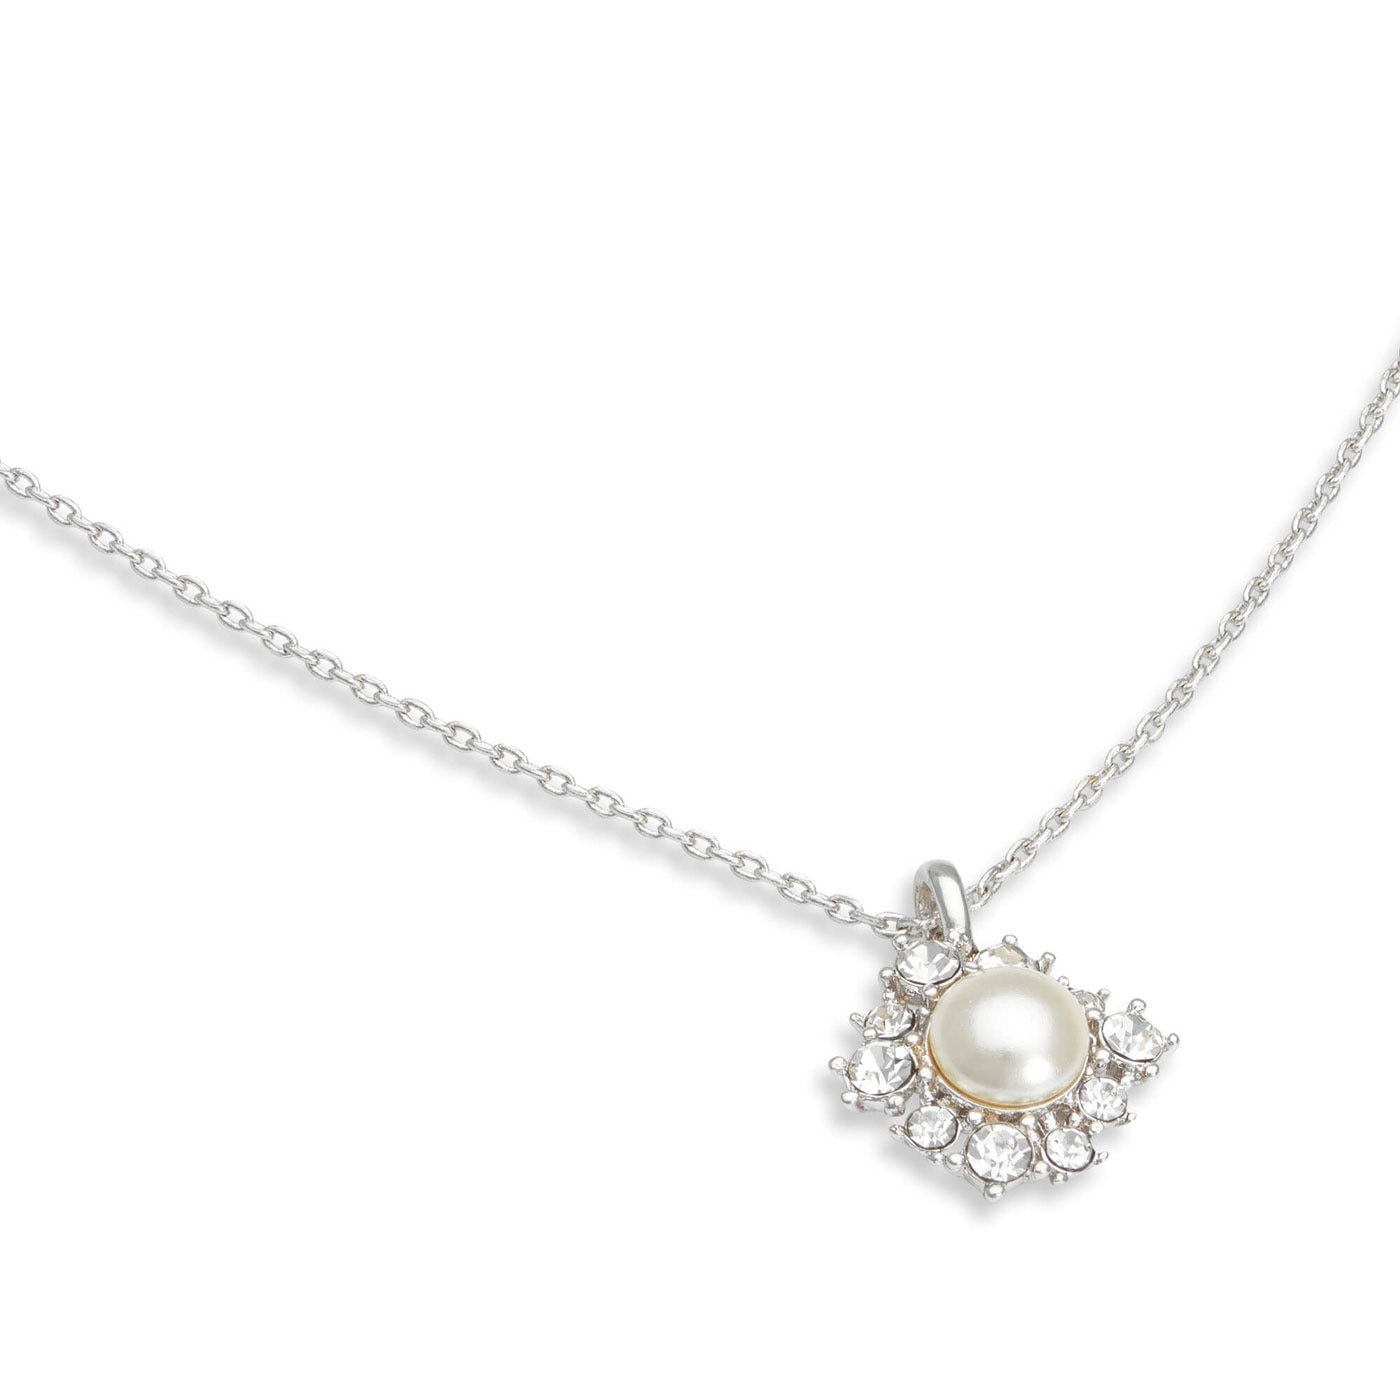 Emily pearl necklace - Ivory